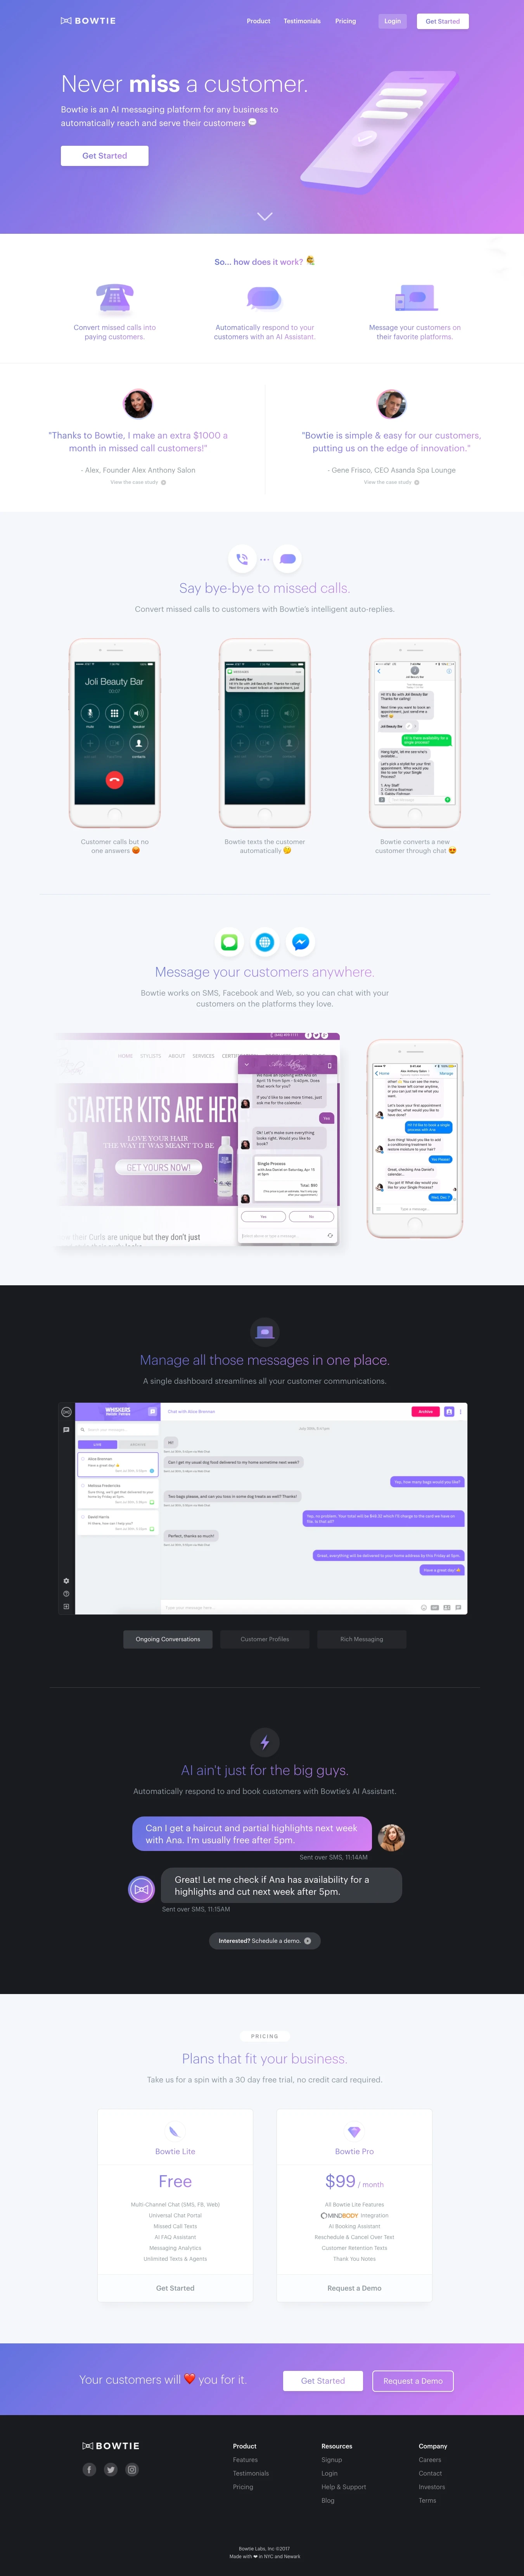 Bowtie Landing Page Example: Bowtie is an AI messaging platform for any business to automatically reach and serve their customers